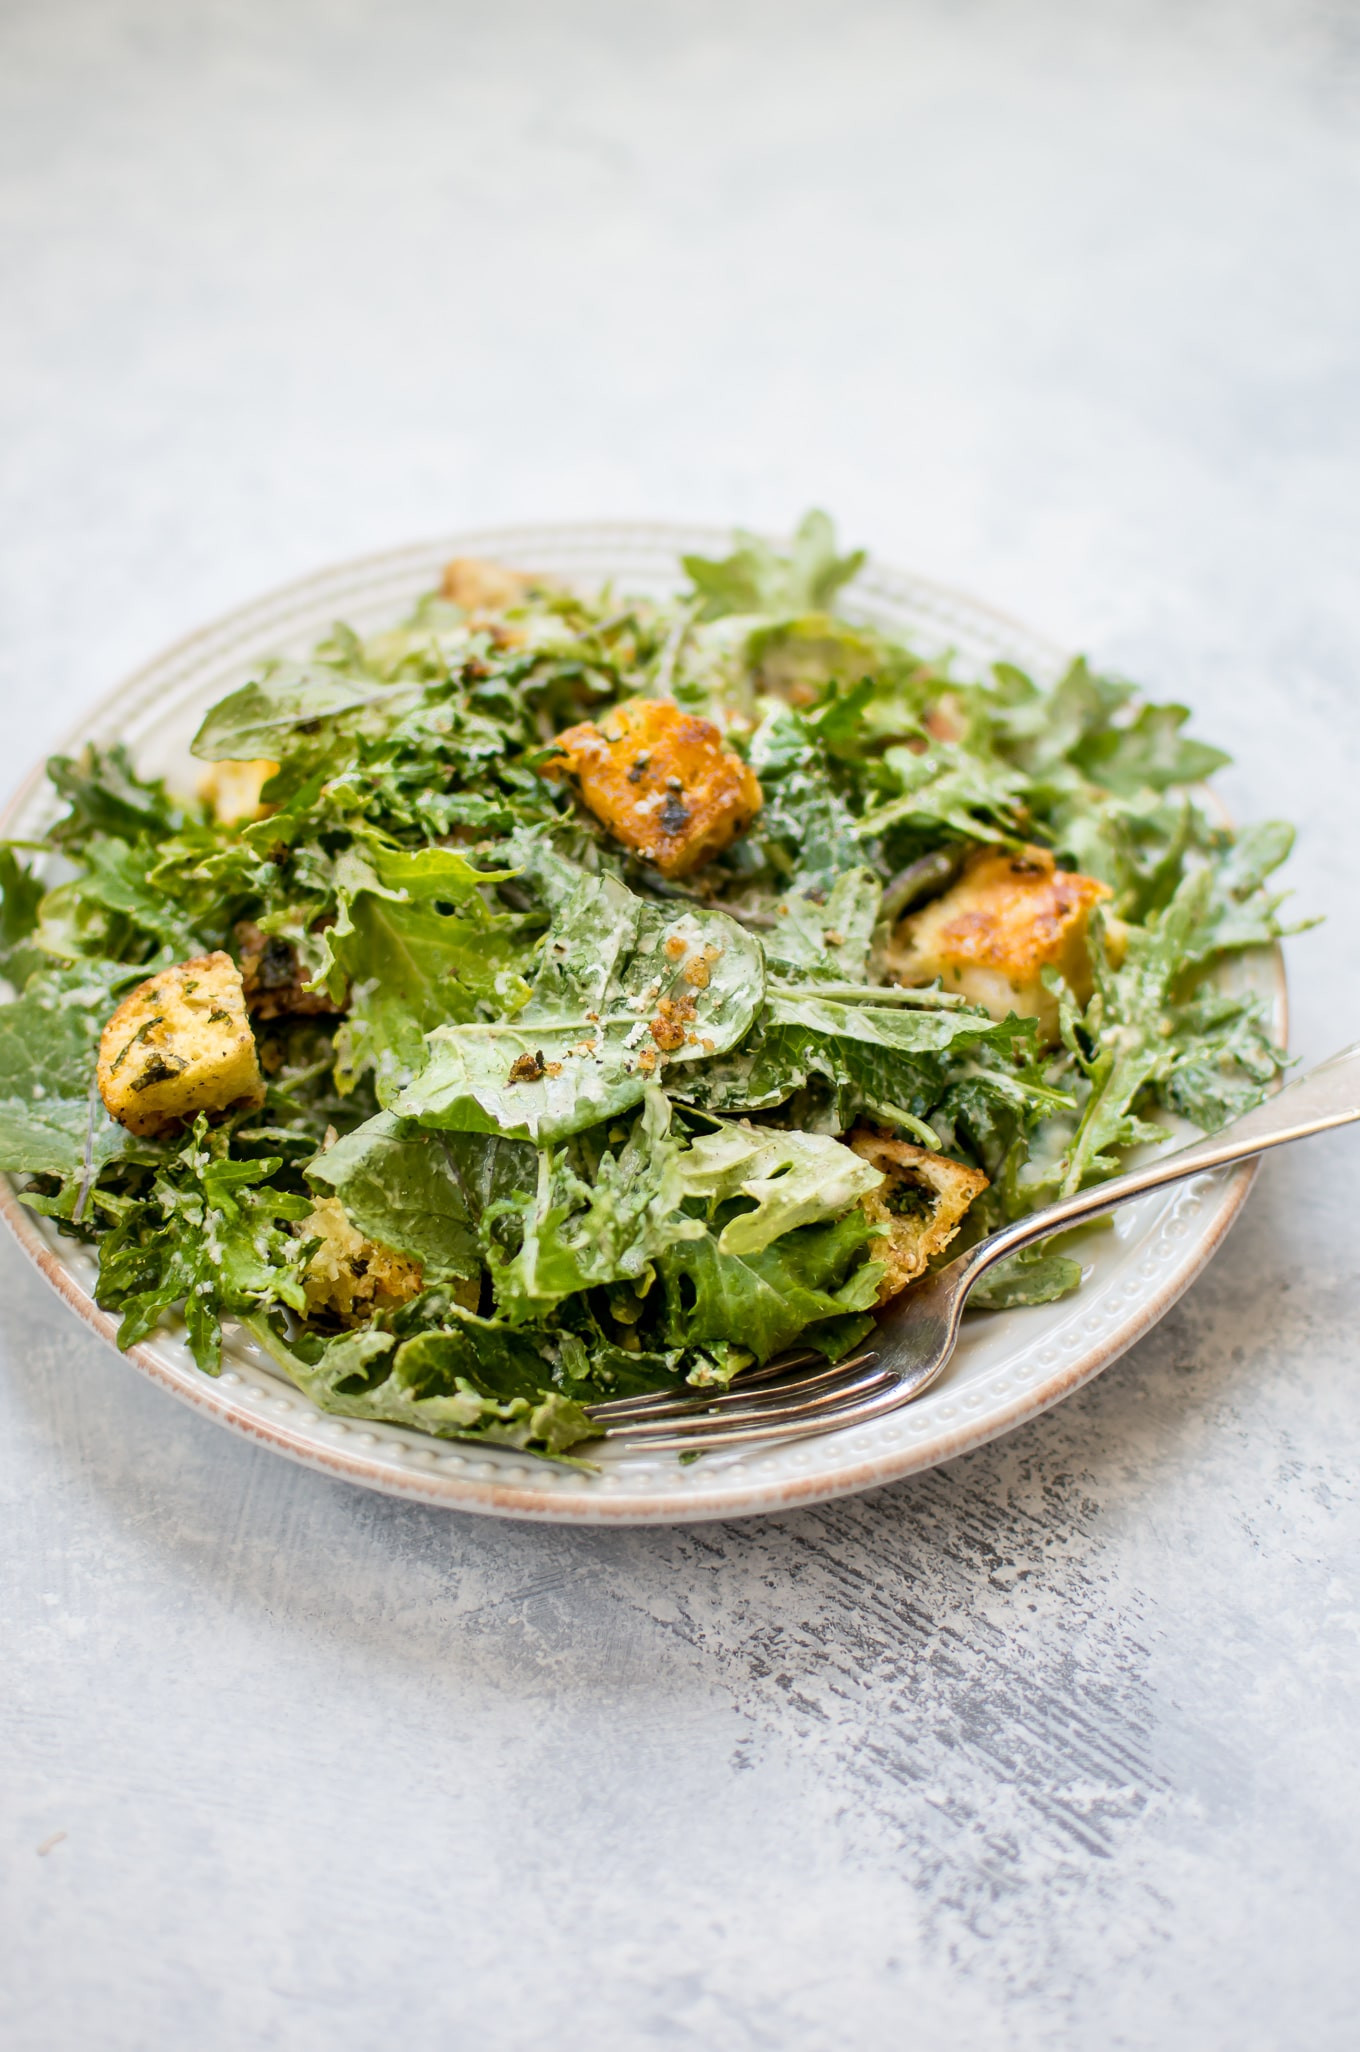 Baby Kale Salad Recipes
 Baby Kale Salad with Lemon Dressing and Parmesan Croutons